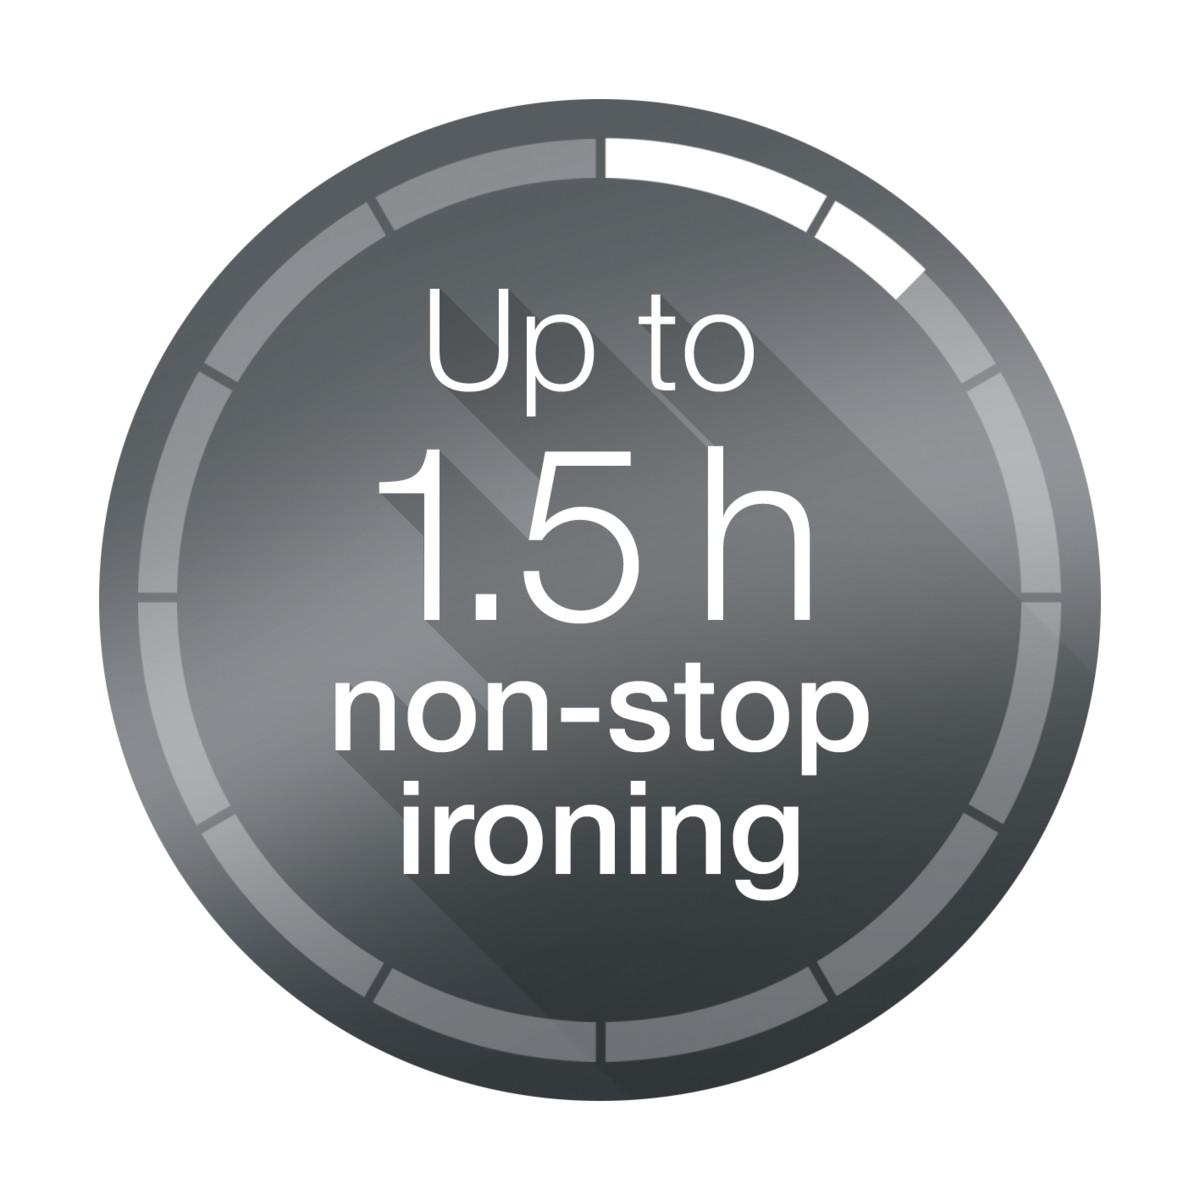 ../../../../../Downloads/ICON_CareStyle_Compact_up-to-1_5h-non-stop-ironing.jpg